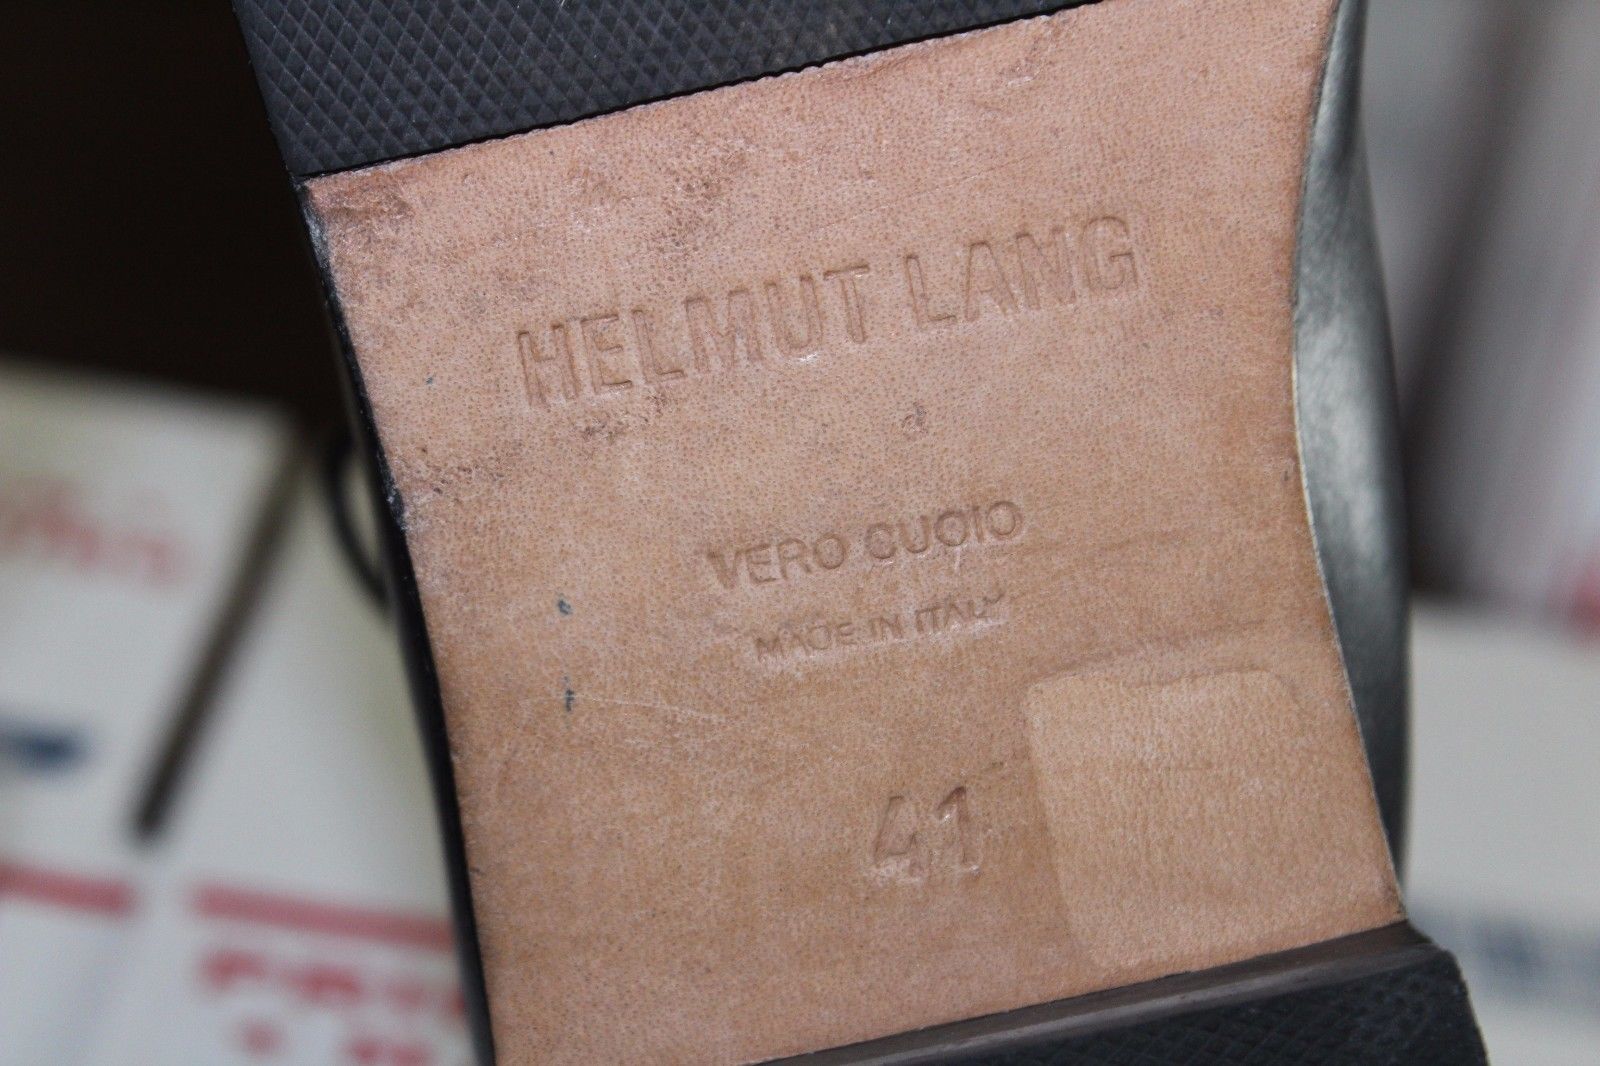 Helmut Lang HELMUT LANG ARCHIVE MADE IN INTALY COMBAT BOOT BLACK LEATHER SIZE 41 EU / 8 US Size US 8 / EU 41 - 7 Thumbnail